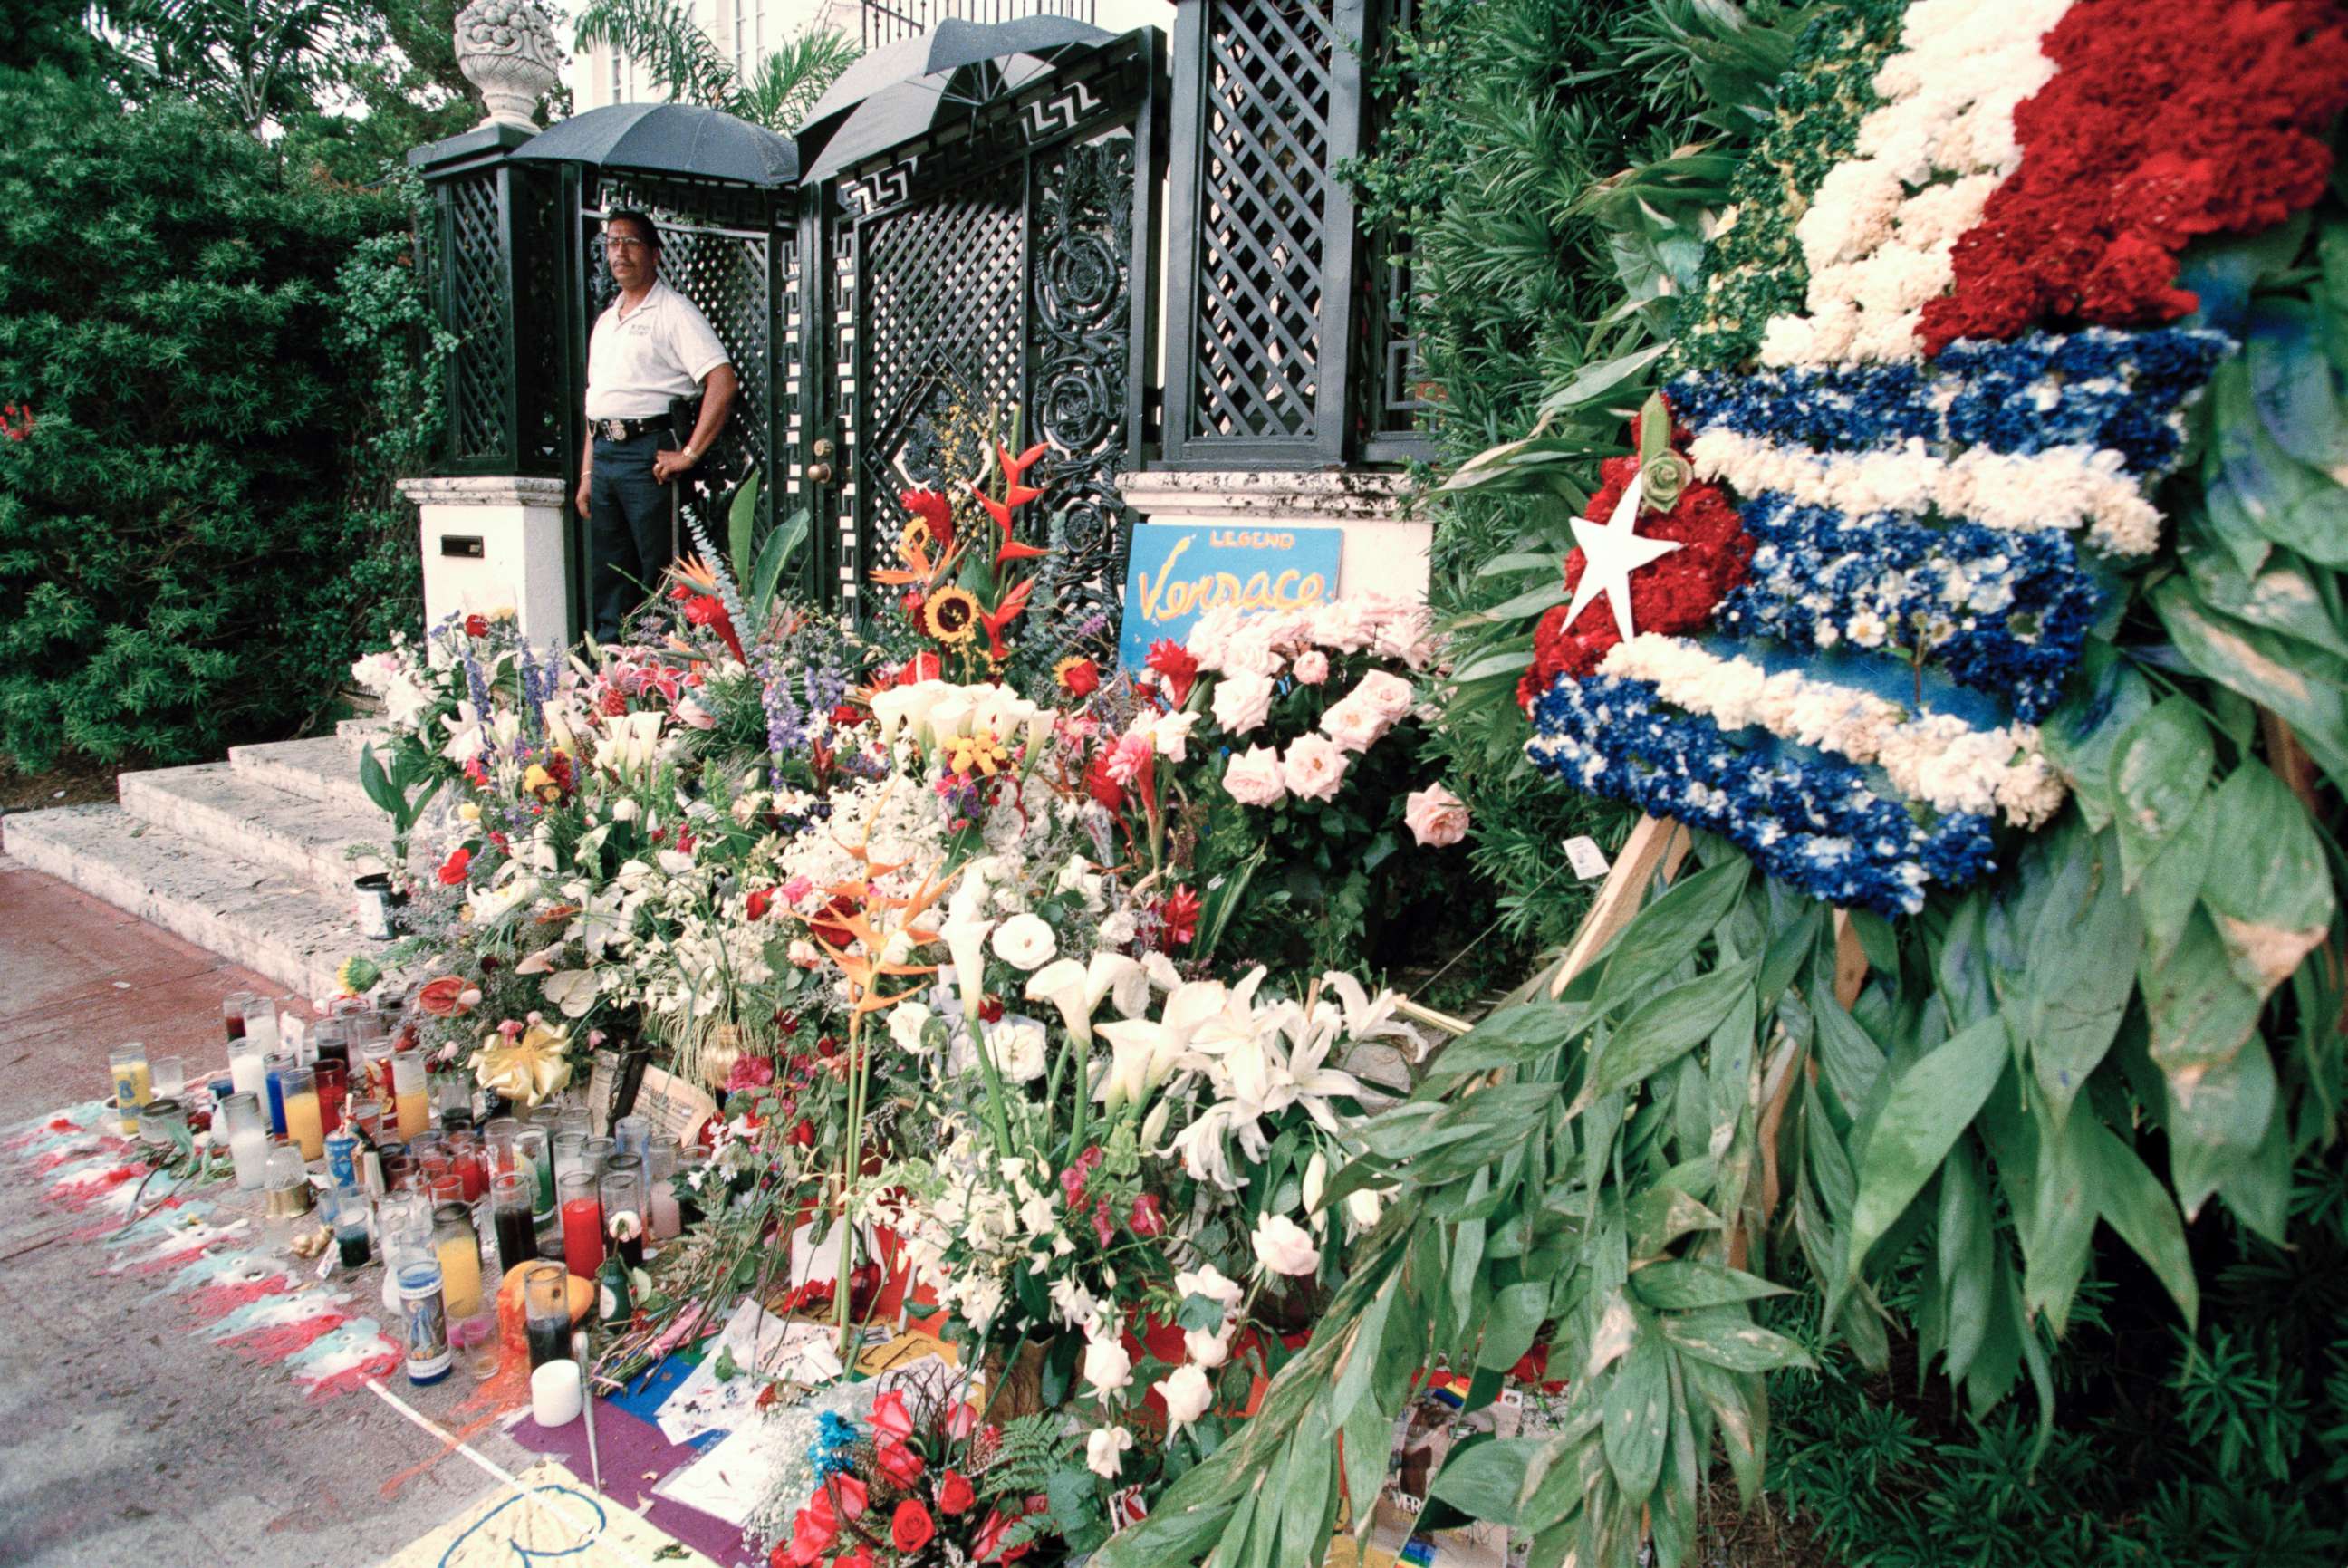 PHOTO: Floral tributes after the murder of Italian fashion designer Gianni Versace outside his Miami Beach home, July 1997. 